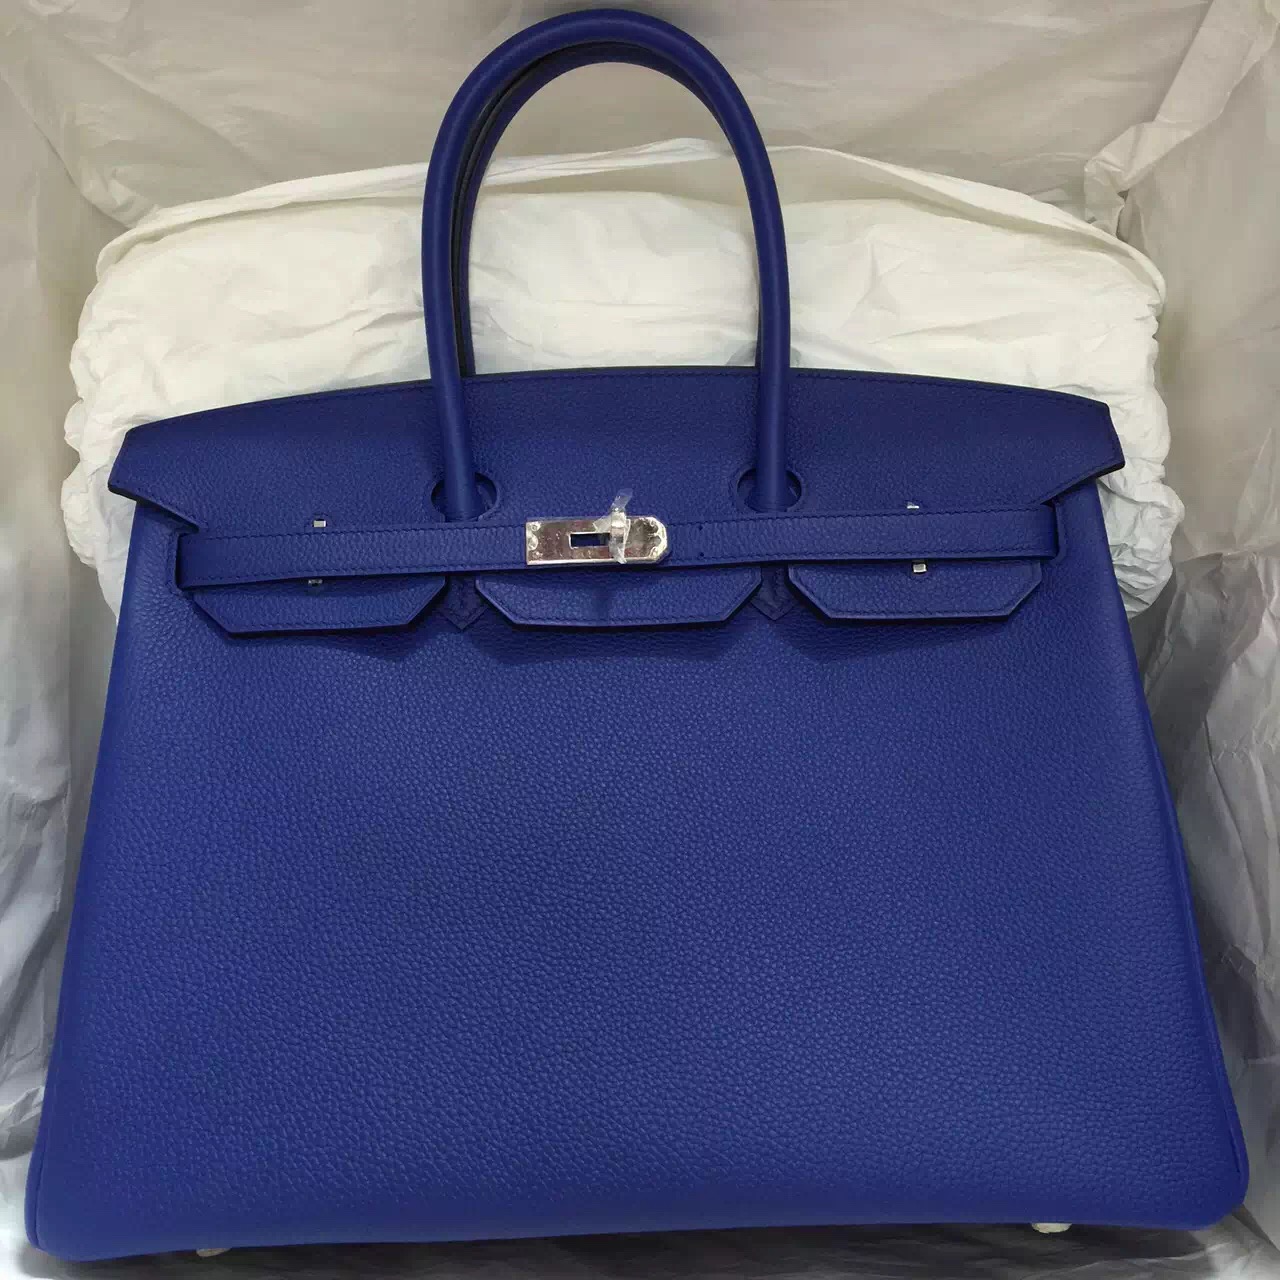 Discount Hermes Togo Leather Birkin Bag in 7T Blue Electric Silver ...  